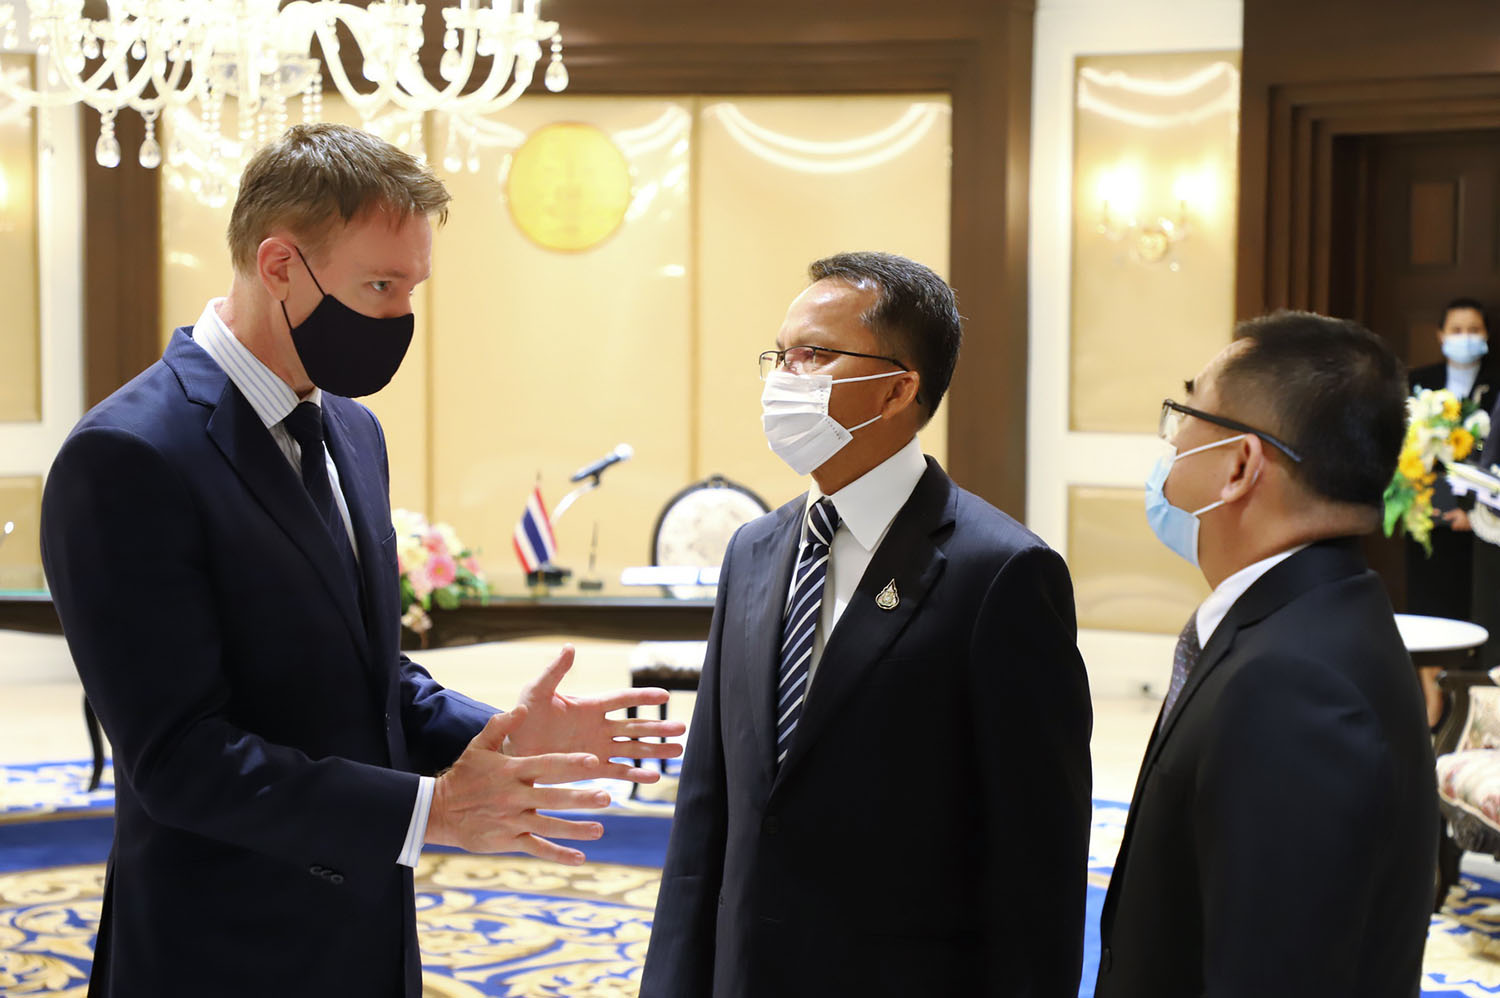 <p>Regional Representative Douglas discusses the UNODC pandemic response programme in Southeast Asia with Minister of Justice Somsak Thepsuthinand Permanent Secretary of Justice Wisit Wisitsoraat</p>